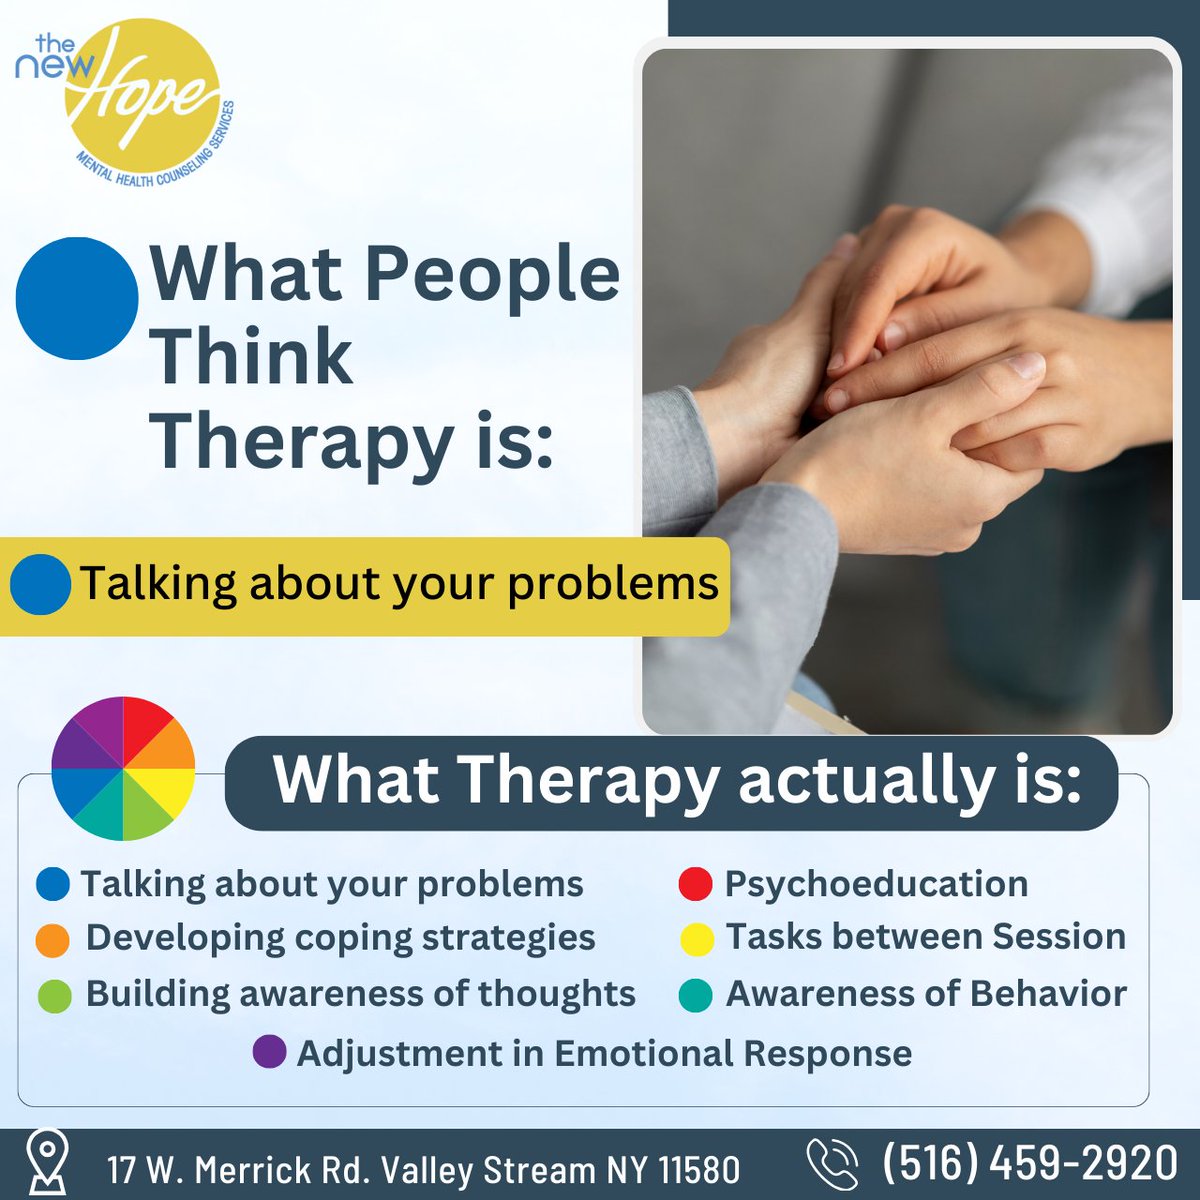 Therapy isn't just about talking—it's about transformation. 

#TherapyJourney #multiculturalcounseling #mentalmealthtips #mentalhealthservices #mentalhealthhelp #Thenewhopemhcs #mentalhealthprofessionals #mentalhealthcounseling #mentalhealththerapist #mentalhealthcounselor